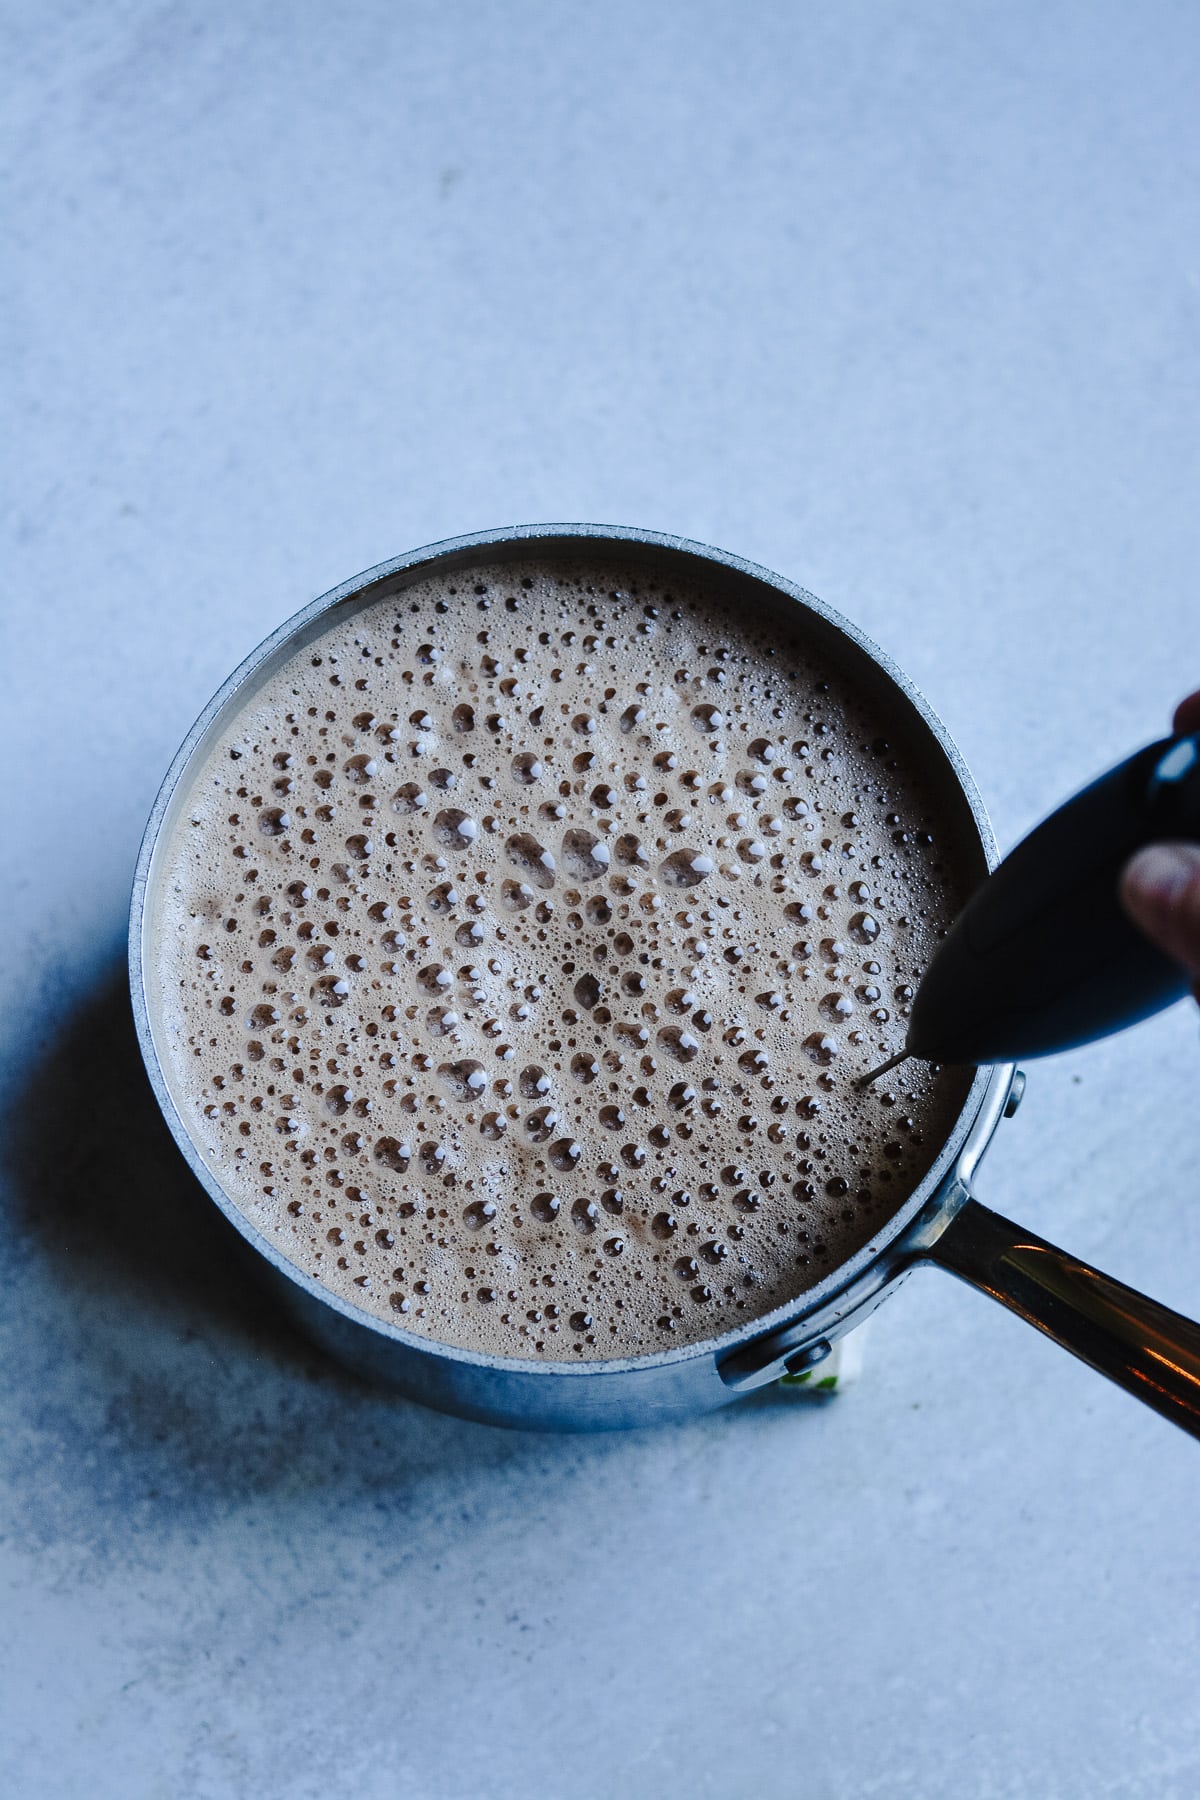 milk frother mixing the hot chocolate in a saucepan.